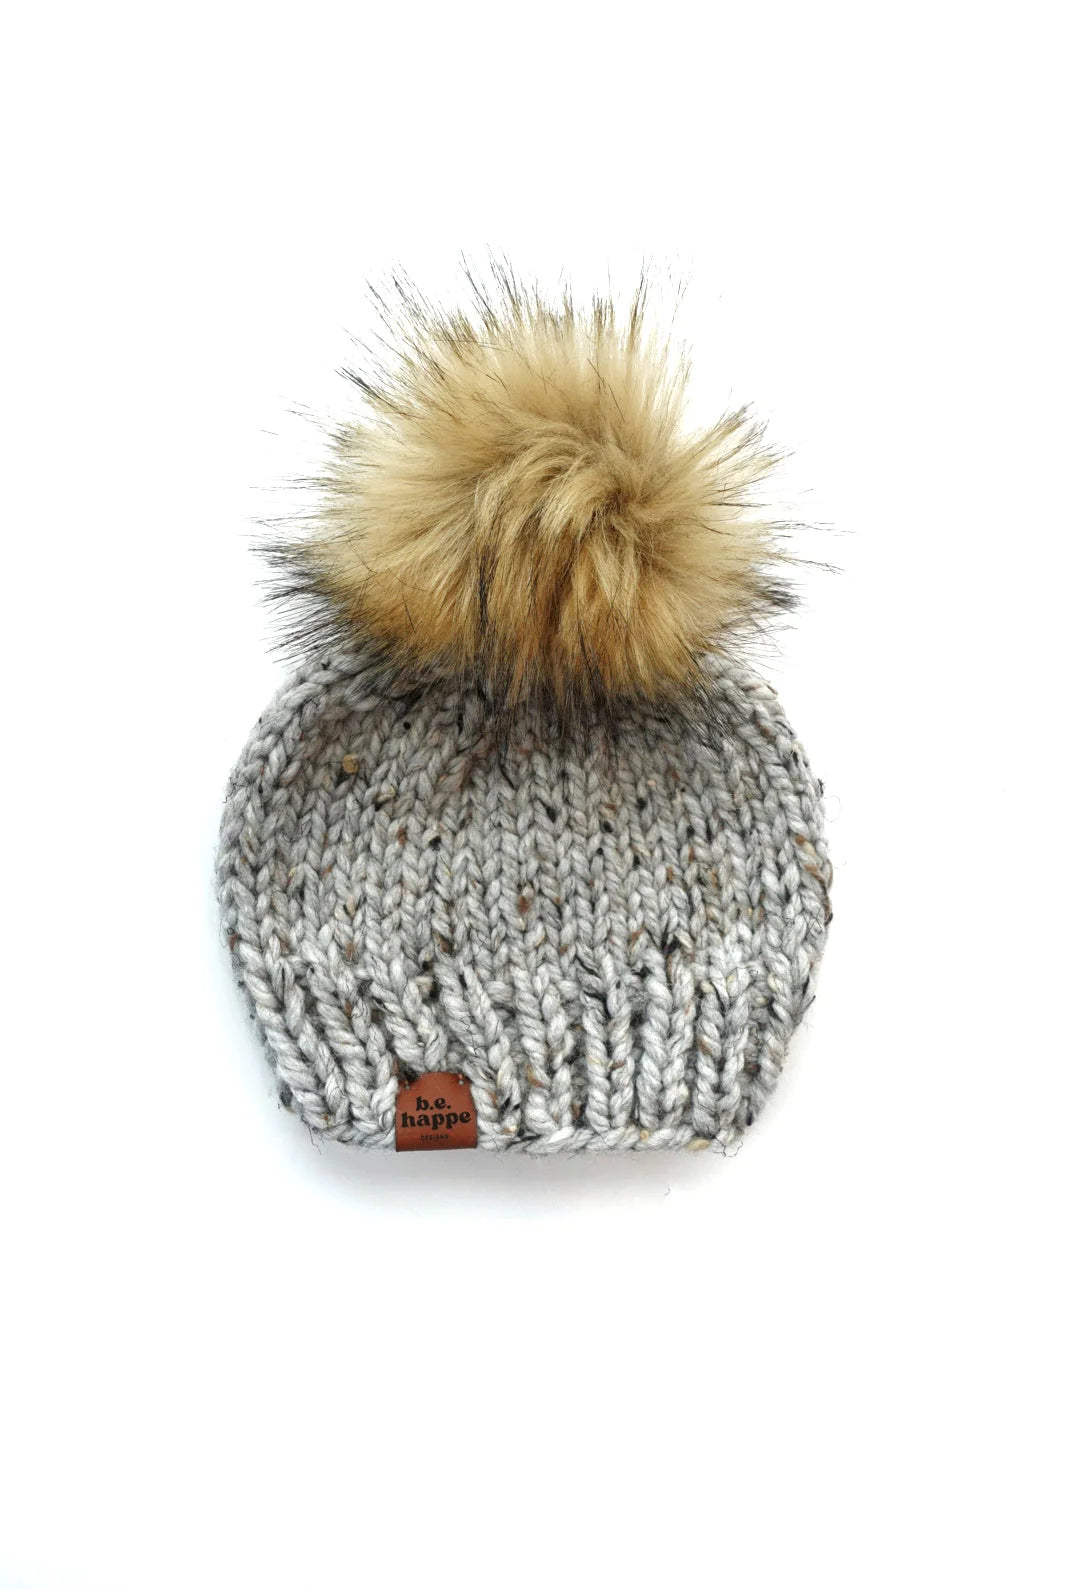 B.E.HAPPE Solid Knit Pom Hat